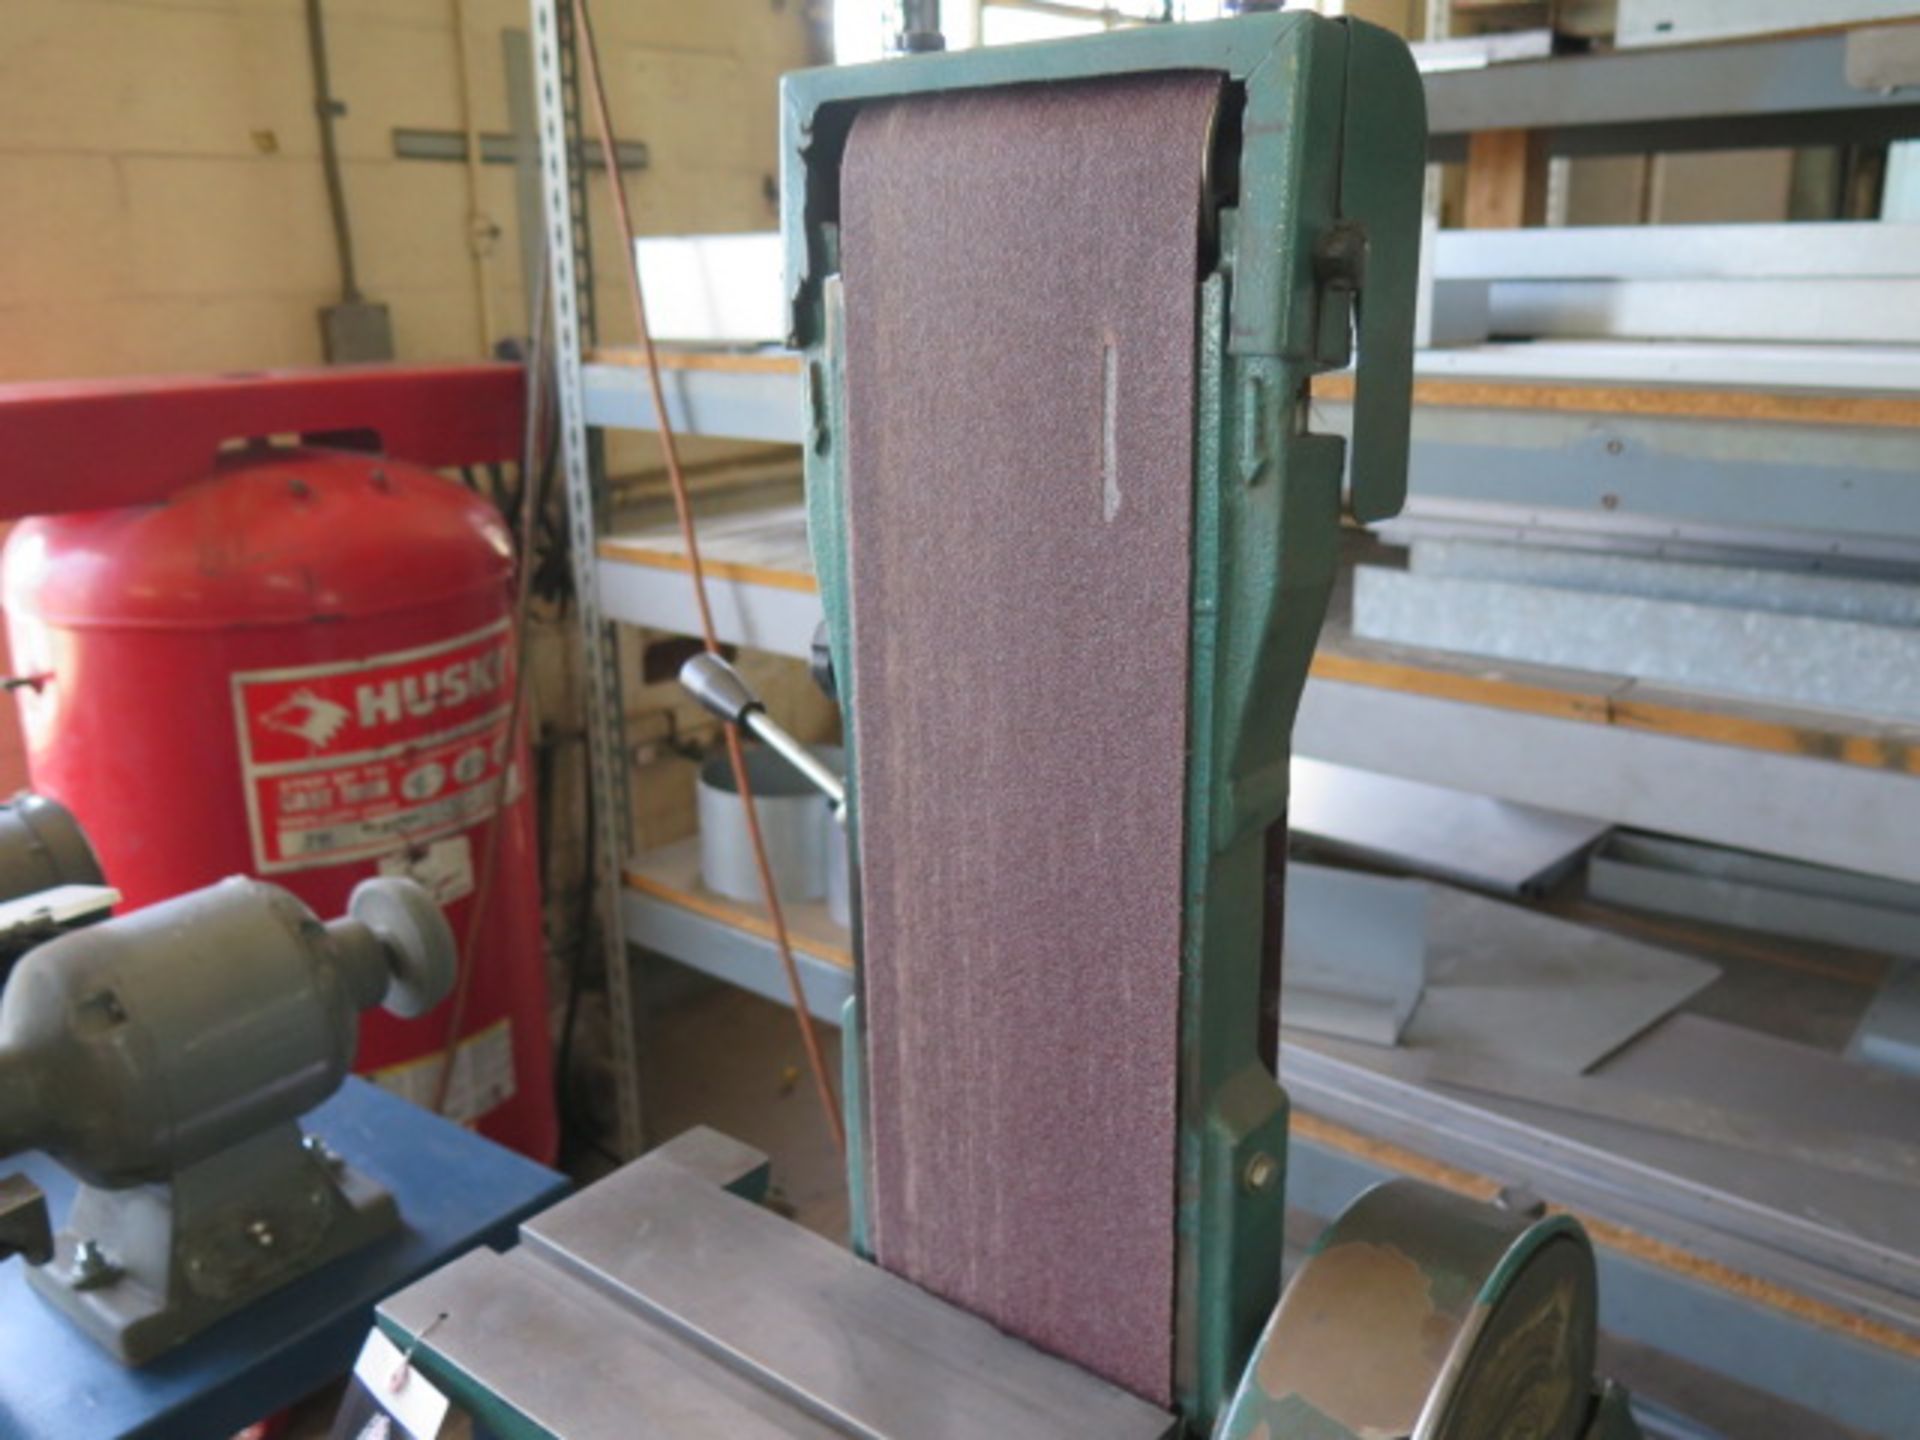 Grizzly mdl. G1014Z 6" Belt / 9" Disc Sander s/n 9-0196 w/ Roll Stand (SOLD AS-IS - NO WARRANTY) - Image 3 of 7